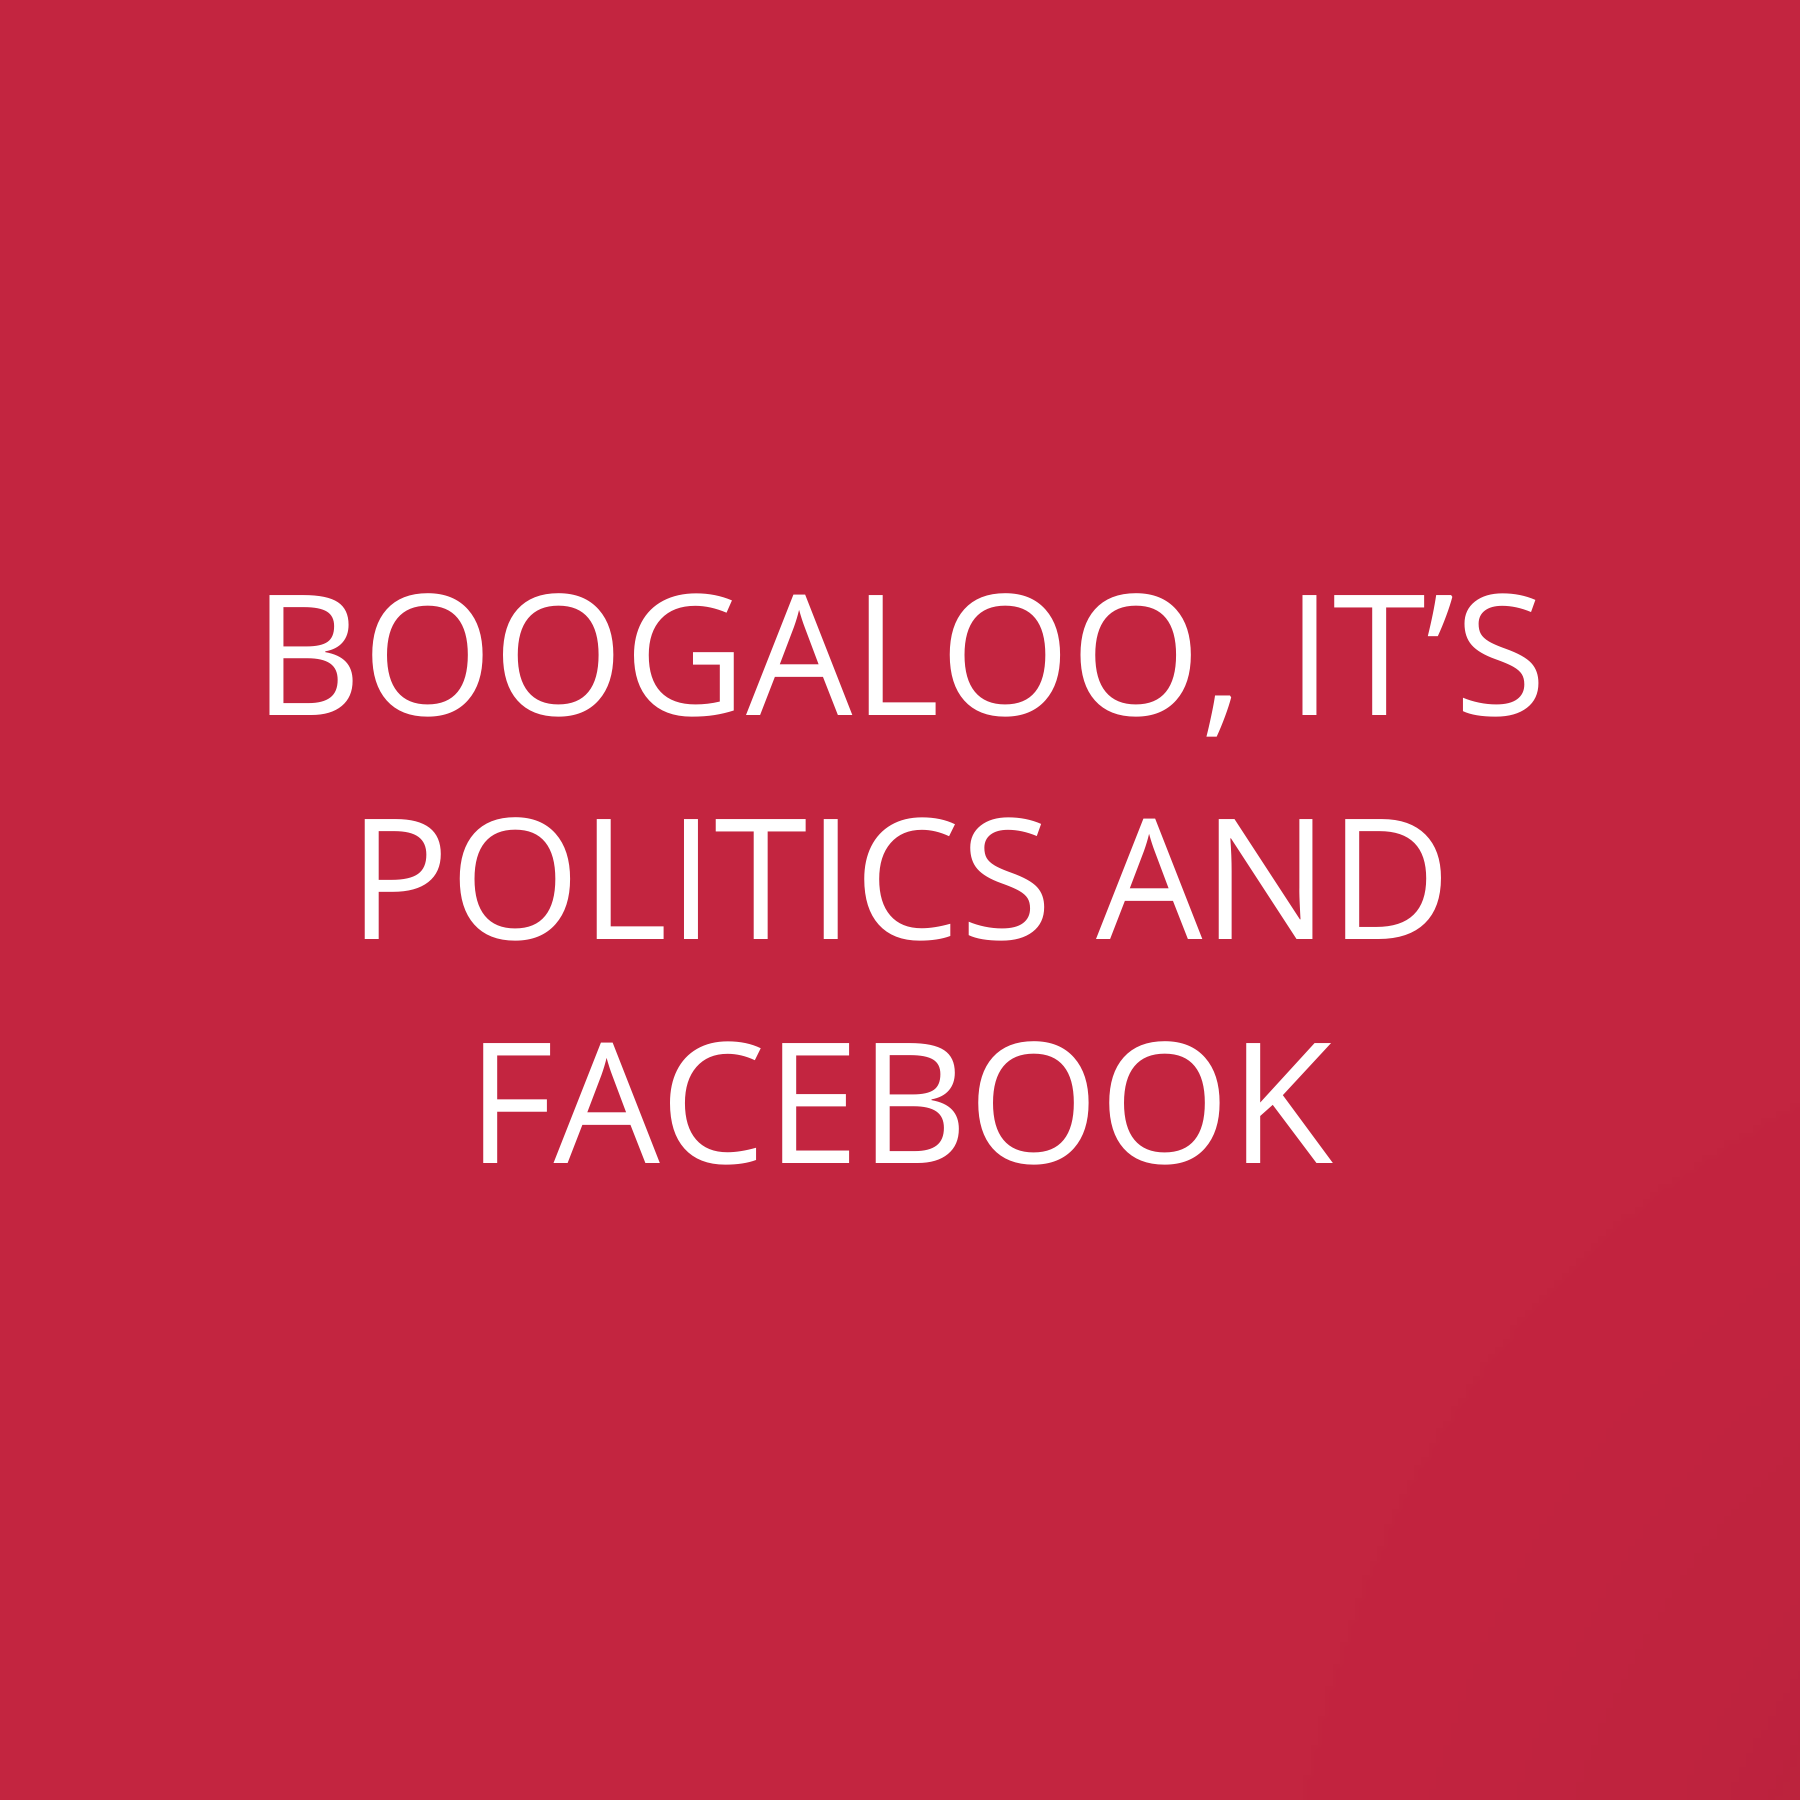 Boogaloo, it’s politics and Facebook